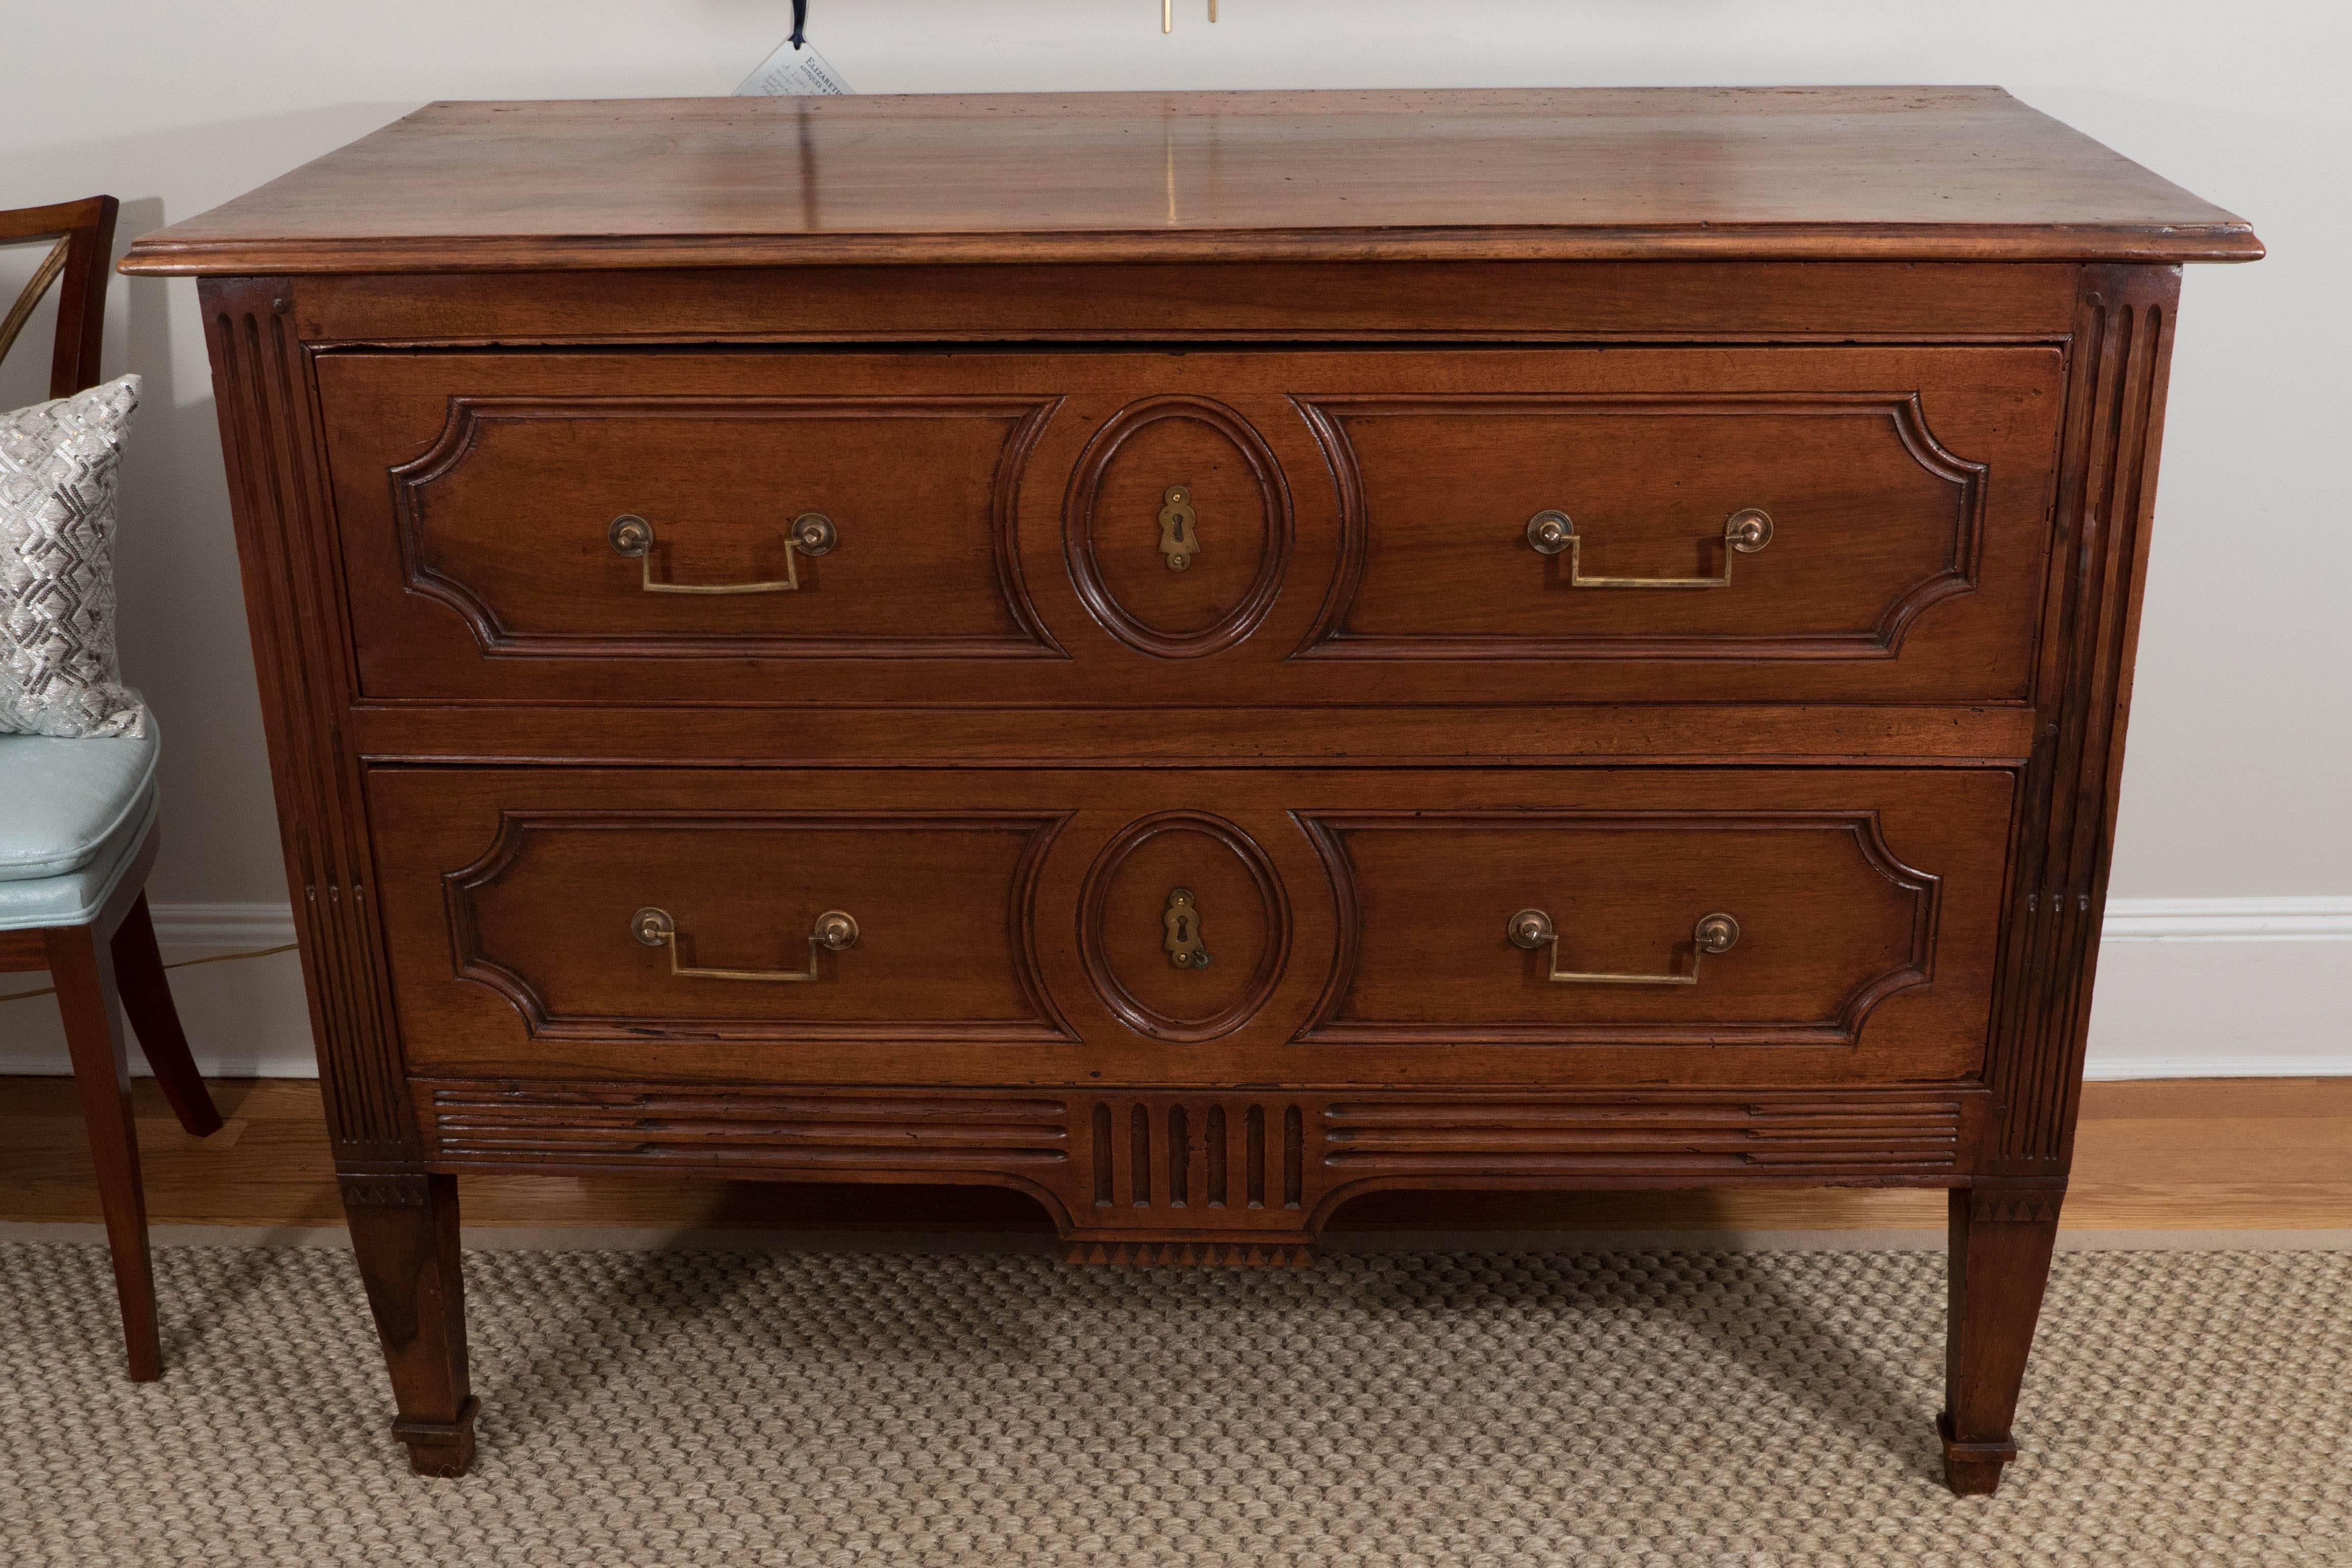 A piece of exceptional quality, this solid walnut commode has two drawers with bronze fittings, reeded side columns and apron, inset panels on front and sides, raised on tapered legs. A true beauty.